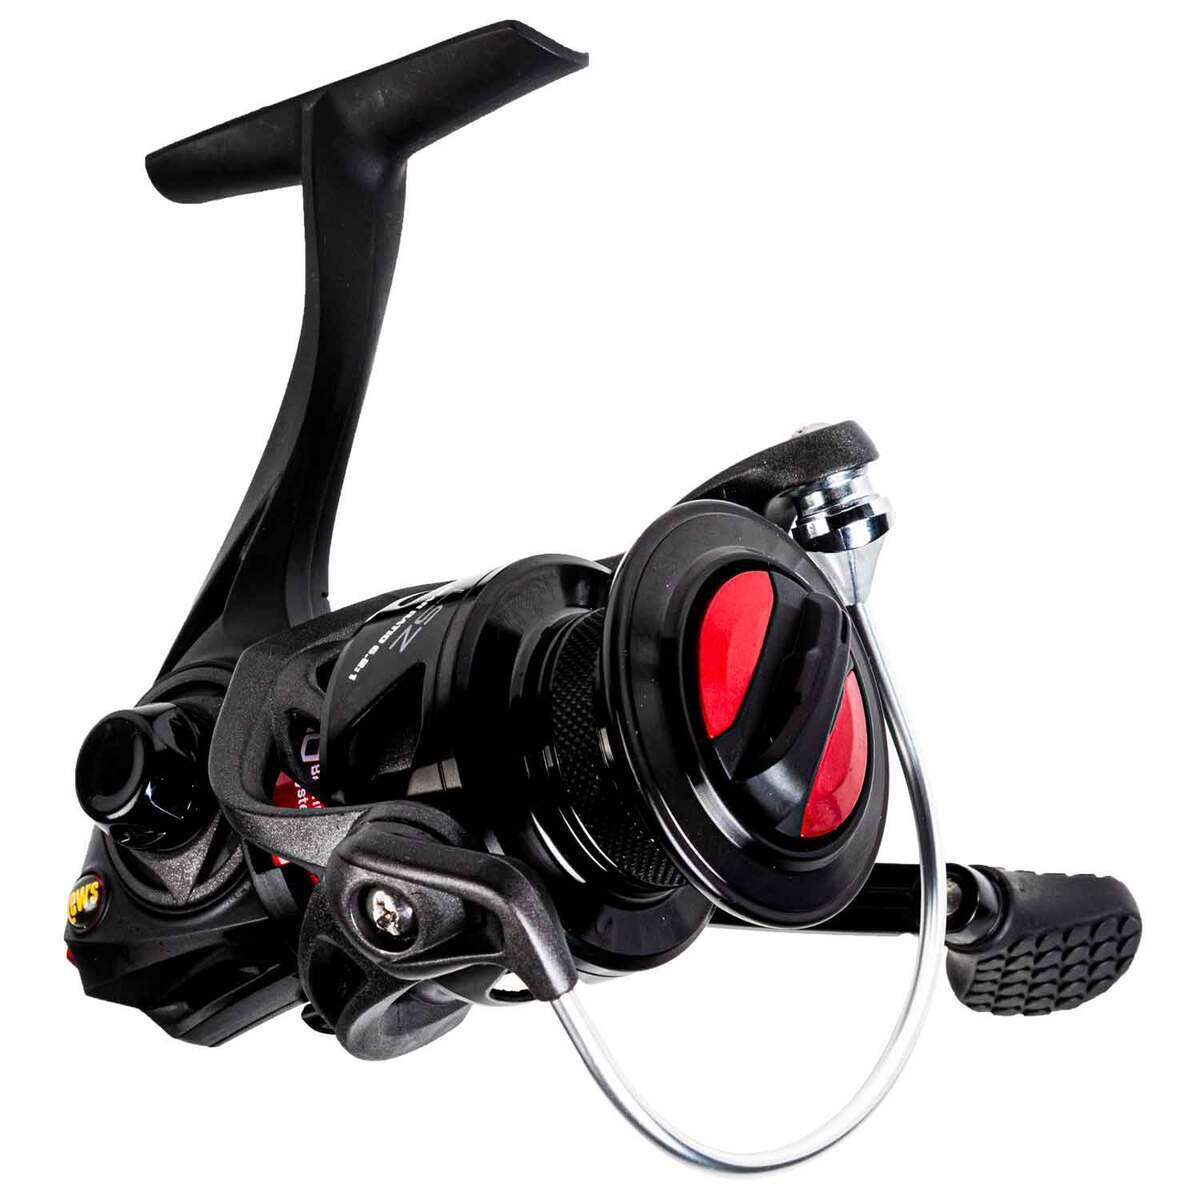 Lew's Laser Sz Speed Spin Spinning Reel - Black/Red 30 by Sportsman's Warehouse